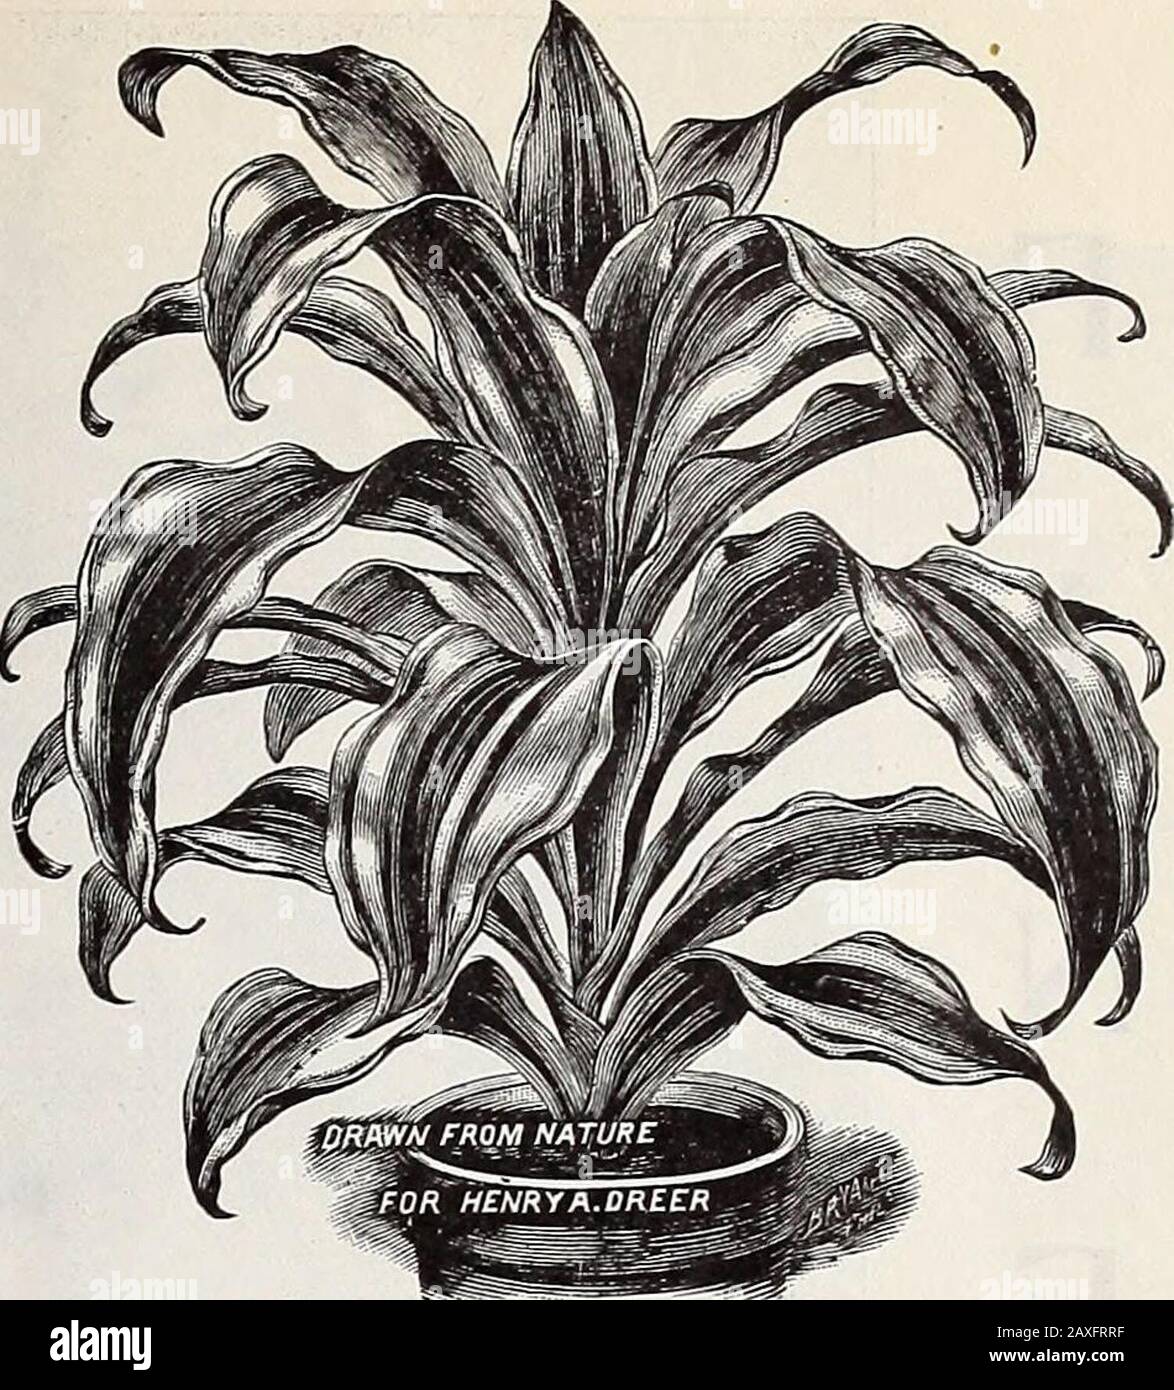 Dreer's wholesale price list 1907 : bulbs plants seasonable flower and vegetable seeds fertilizers, tools, etc., etc . Ficus LUTESCENS (Mistletoe Fig) DRAOENA LINDENI Ficus Pandurata. (The iVIajestic Rubber Plant.) A truly majestic plant. Its gigantic leaves, which frequently meas-ure 10 inches in width by 15 inches in length, are irregular in outline,are of a rich, deep green with creamy-white veins and of remarkablesubstance, enabling the plant to flourish under the most unfavorableconditions. One of the finest foliage plants of recent years. The stockis limited, and orders will be filled in Stock Photo